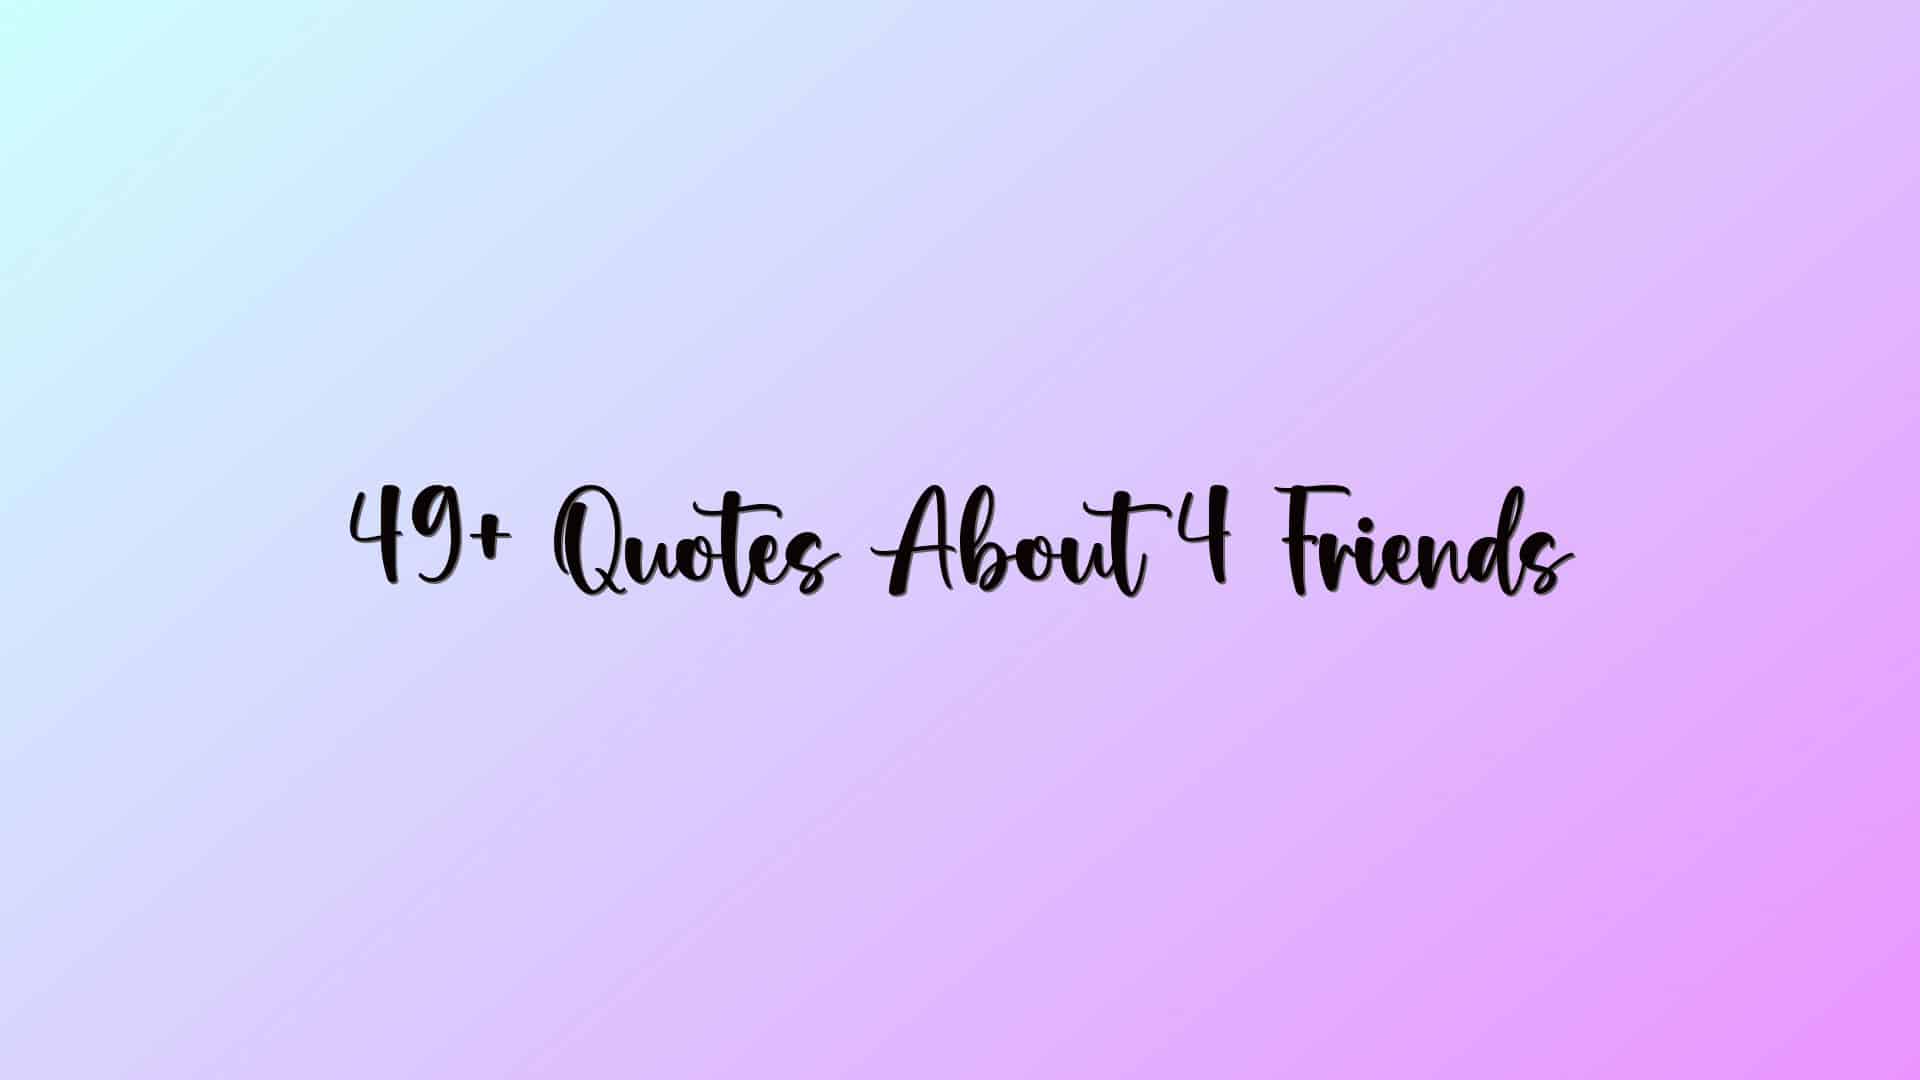 49+ Quotes About 4 Friends